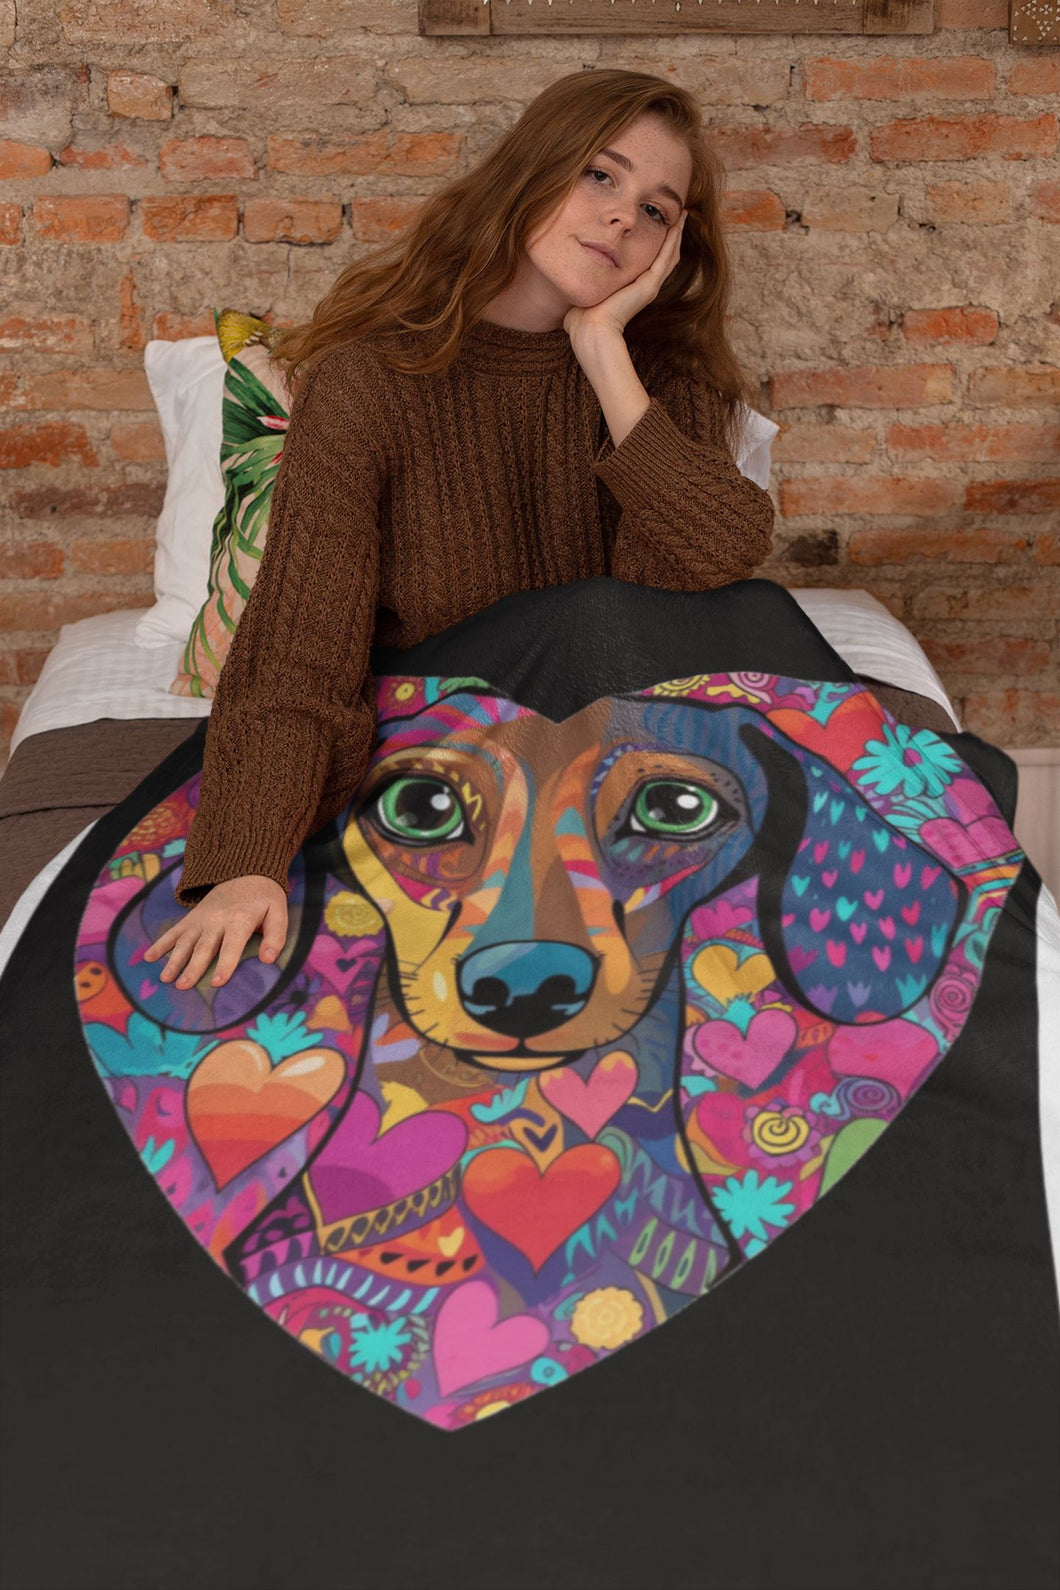 Image of a lady wrapping herself in a beautiful dachshund blanket